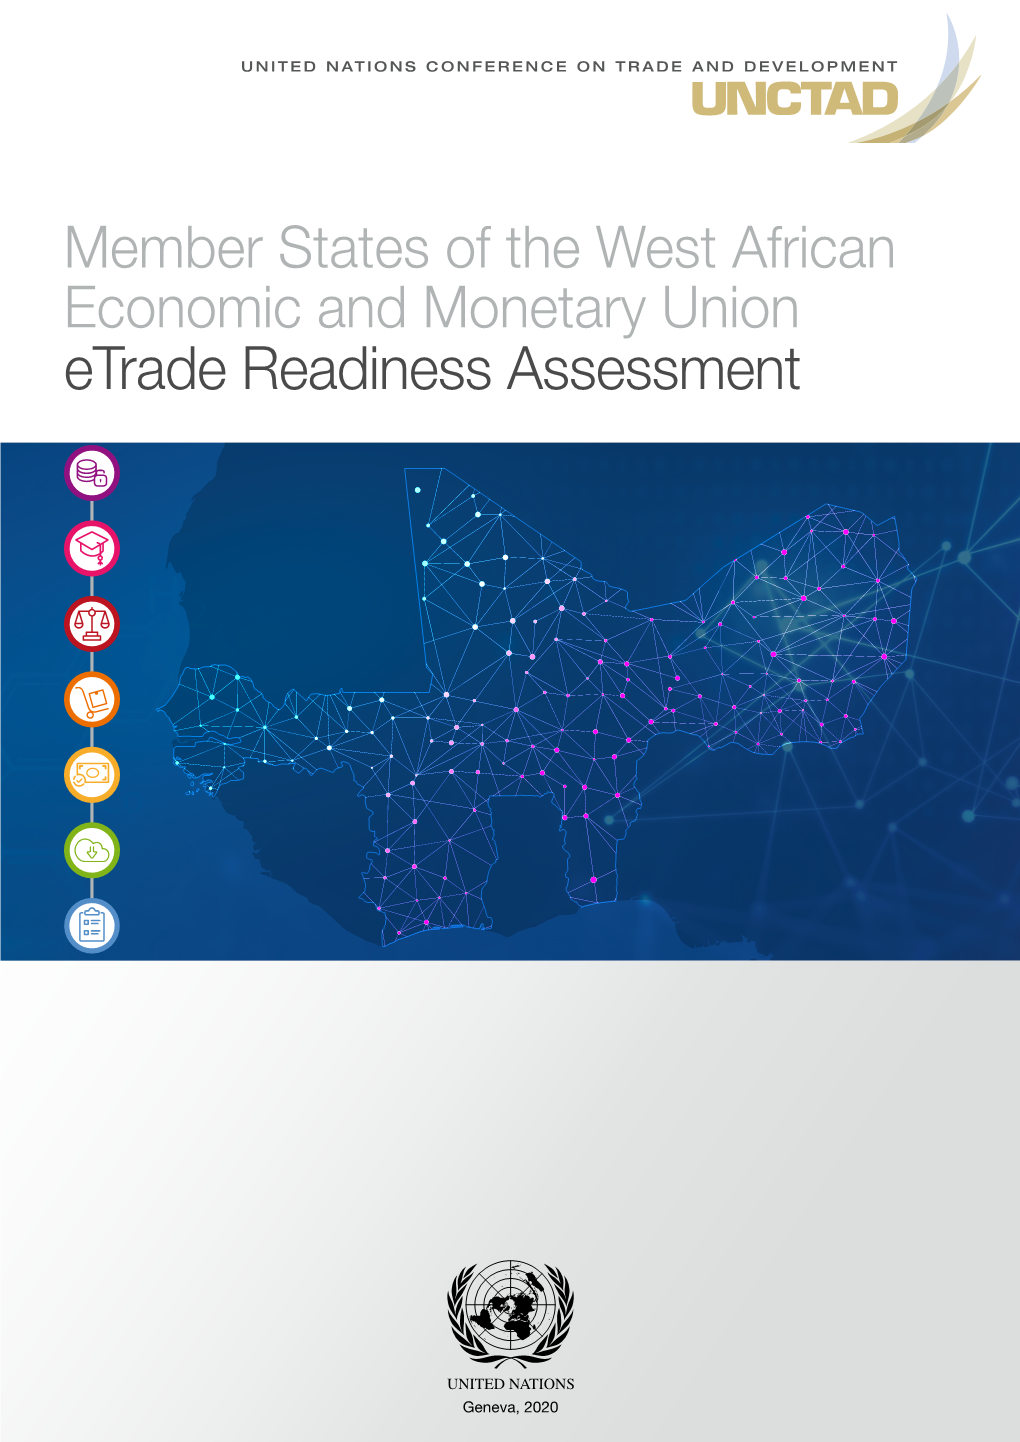 Member States of the West African Economic and Monetary Union Etrade Readiness Assessment